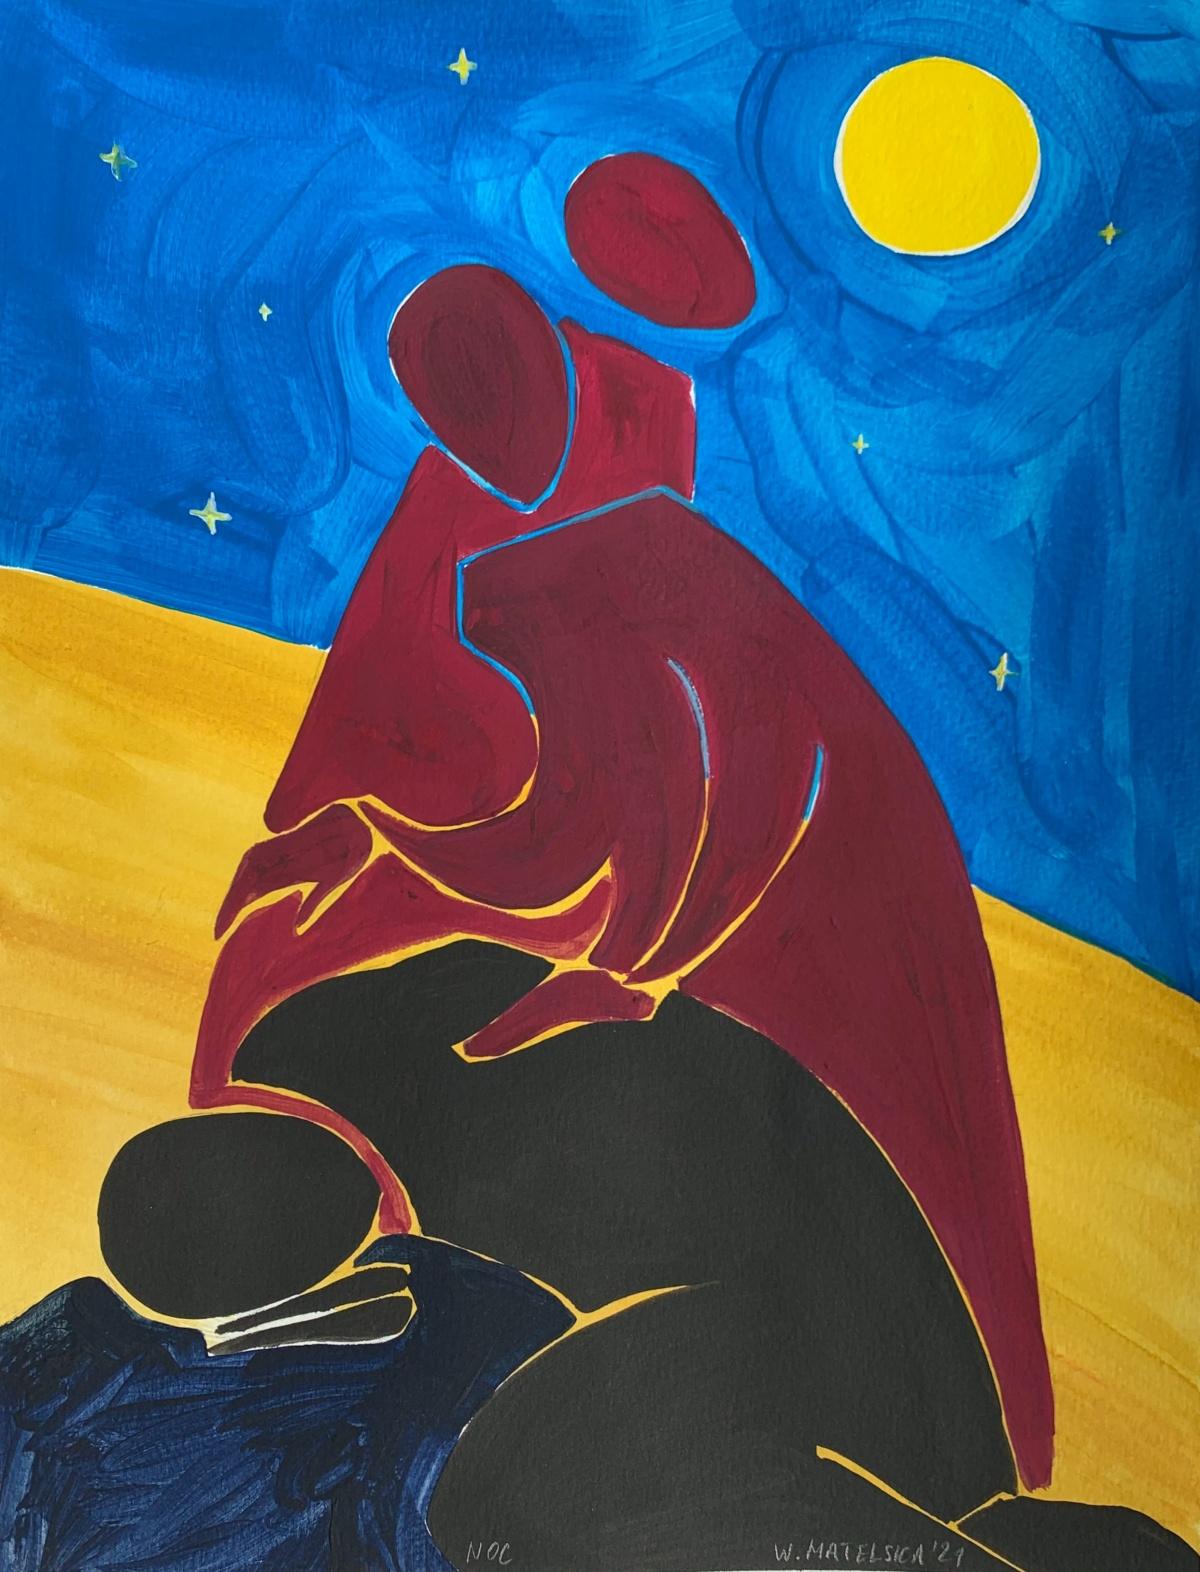 A night - Figurative Painting on Paper, Young art, Minimalism, Vibrant 